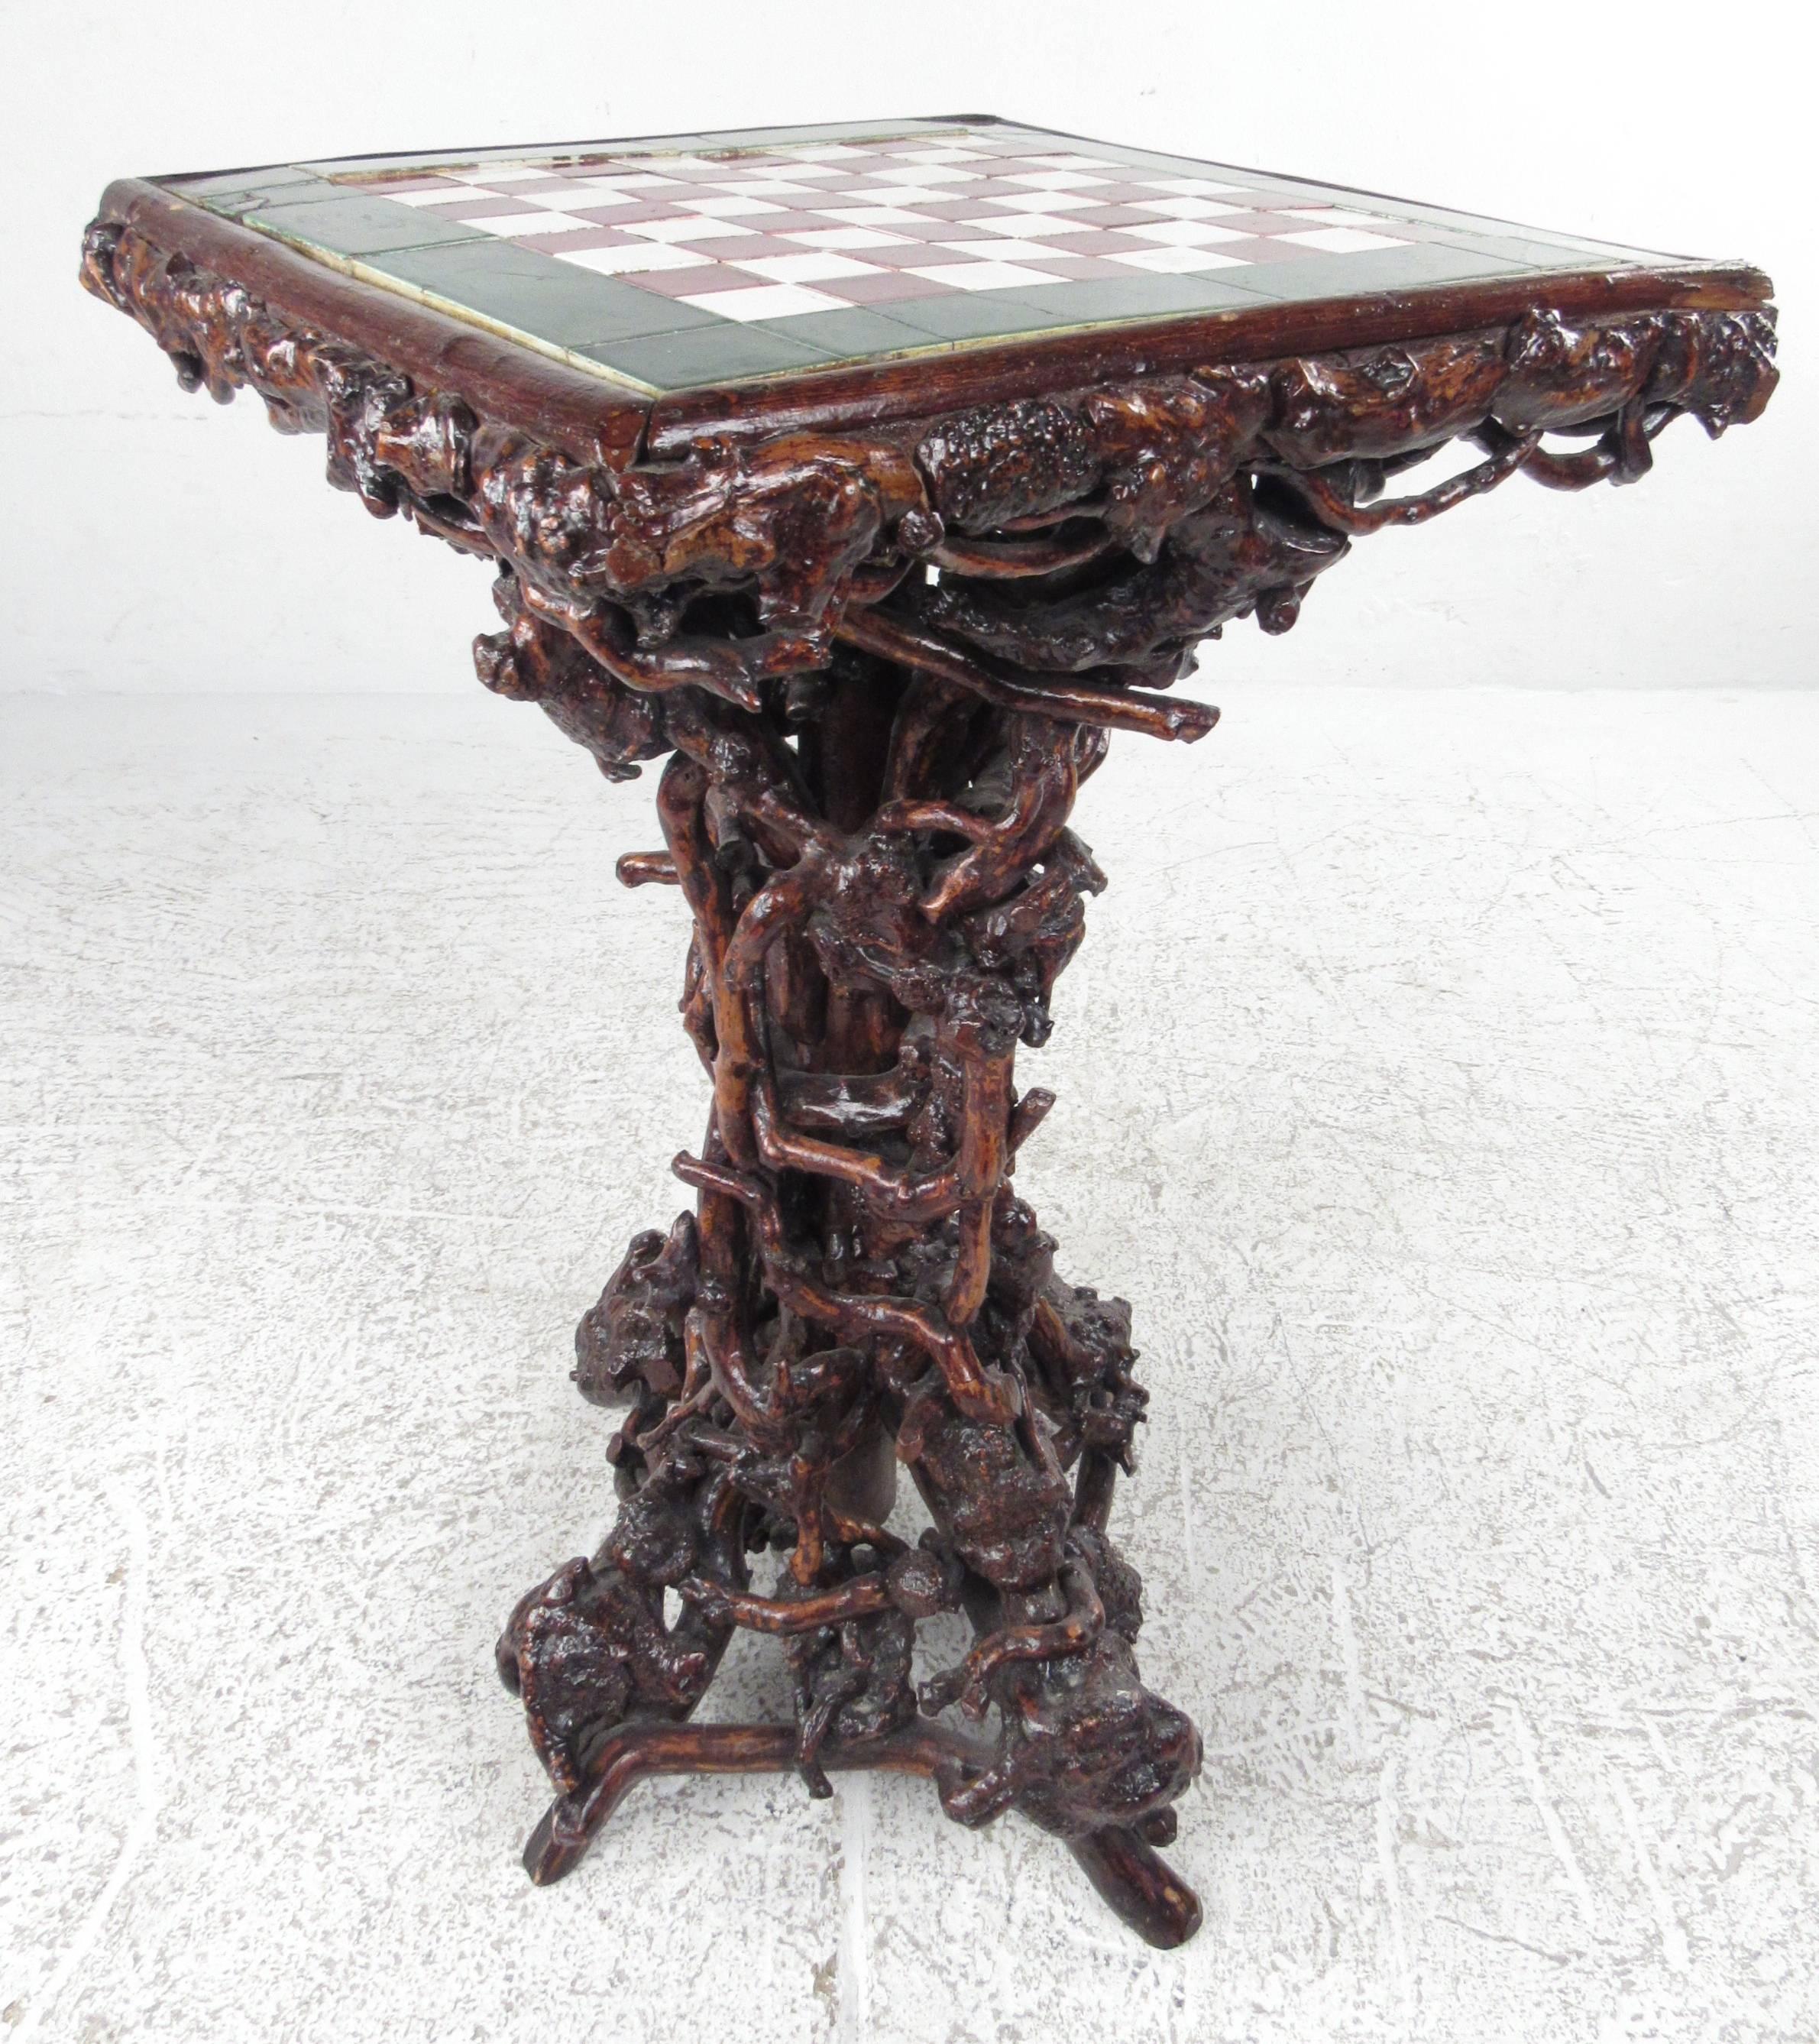 Elaborate tangled twig and root base supporting a square ceramic tile chessboard top. Please confirm item location (NY or NJ) with dealer.